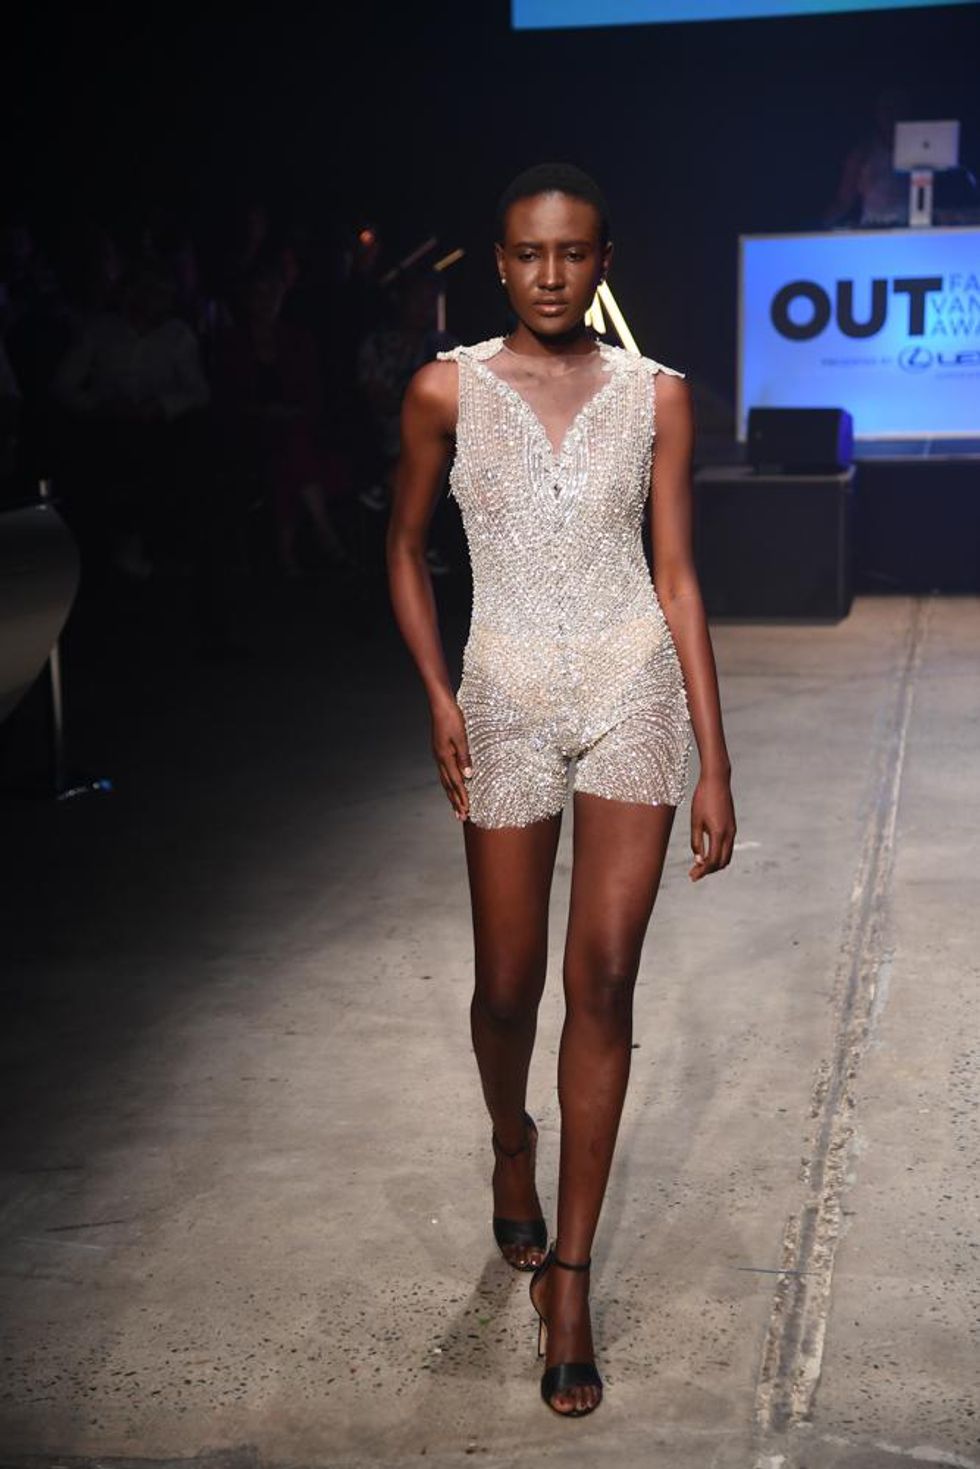 Grayling Purnell's model on the runway